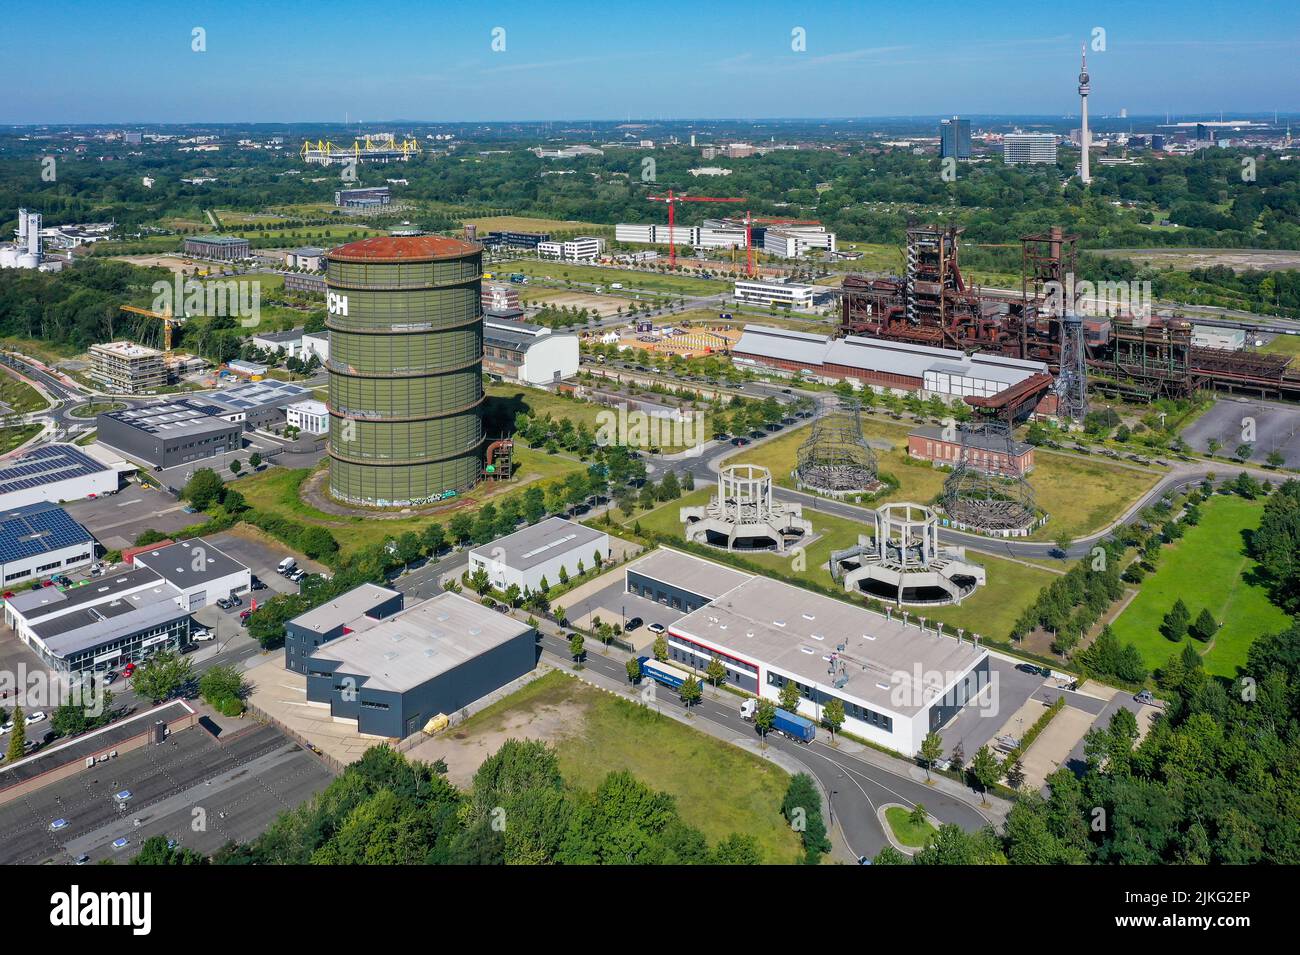 23.05.2022, Germany, North Rhine-Westphalia, Dortmund - Phoenix West. After the closure of the old Hoesch blast furnace plant in 1998, the site was re Stock Photo